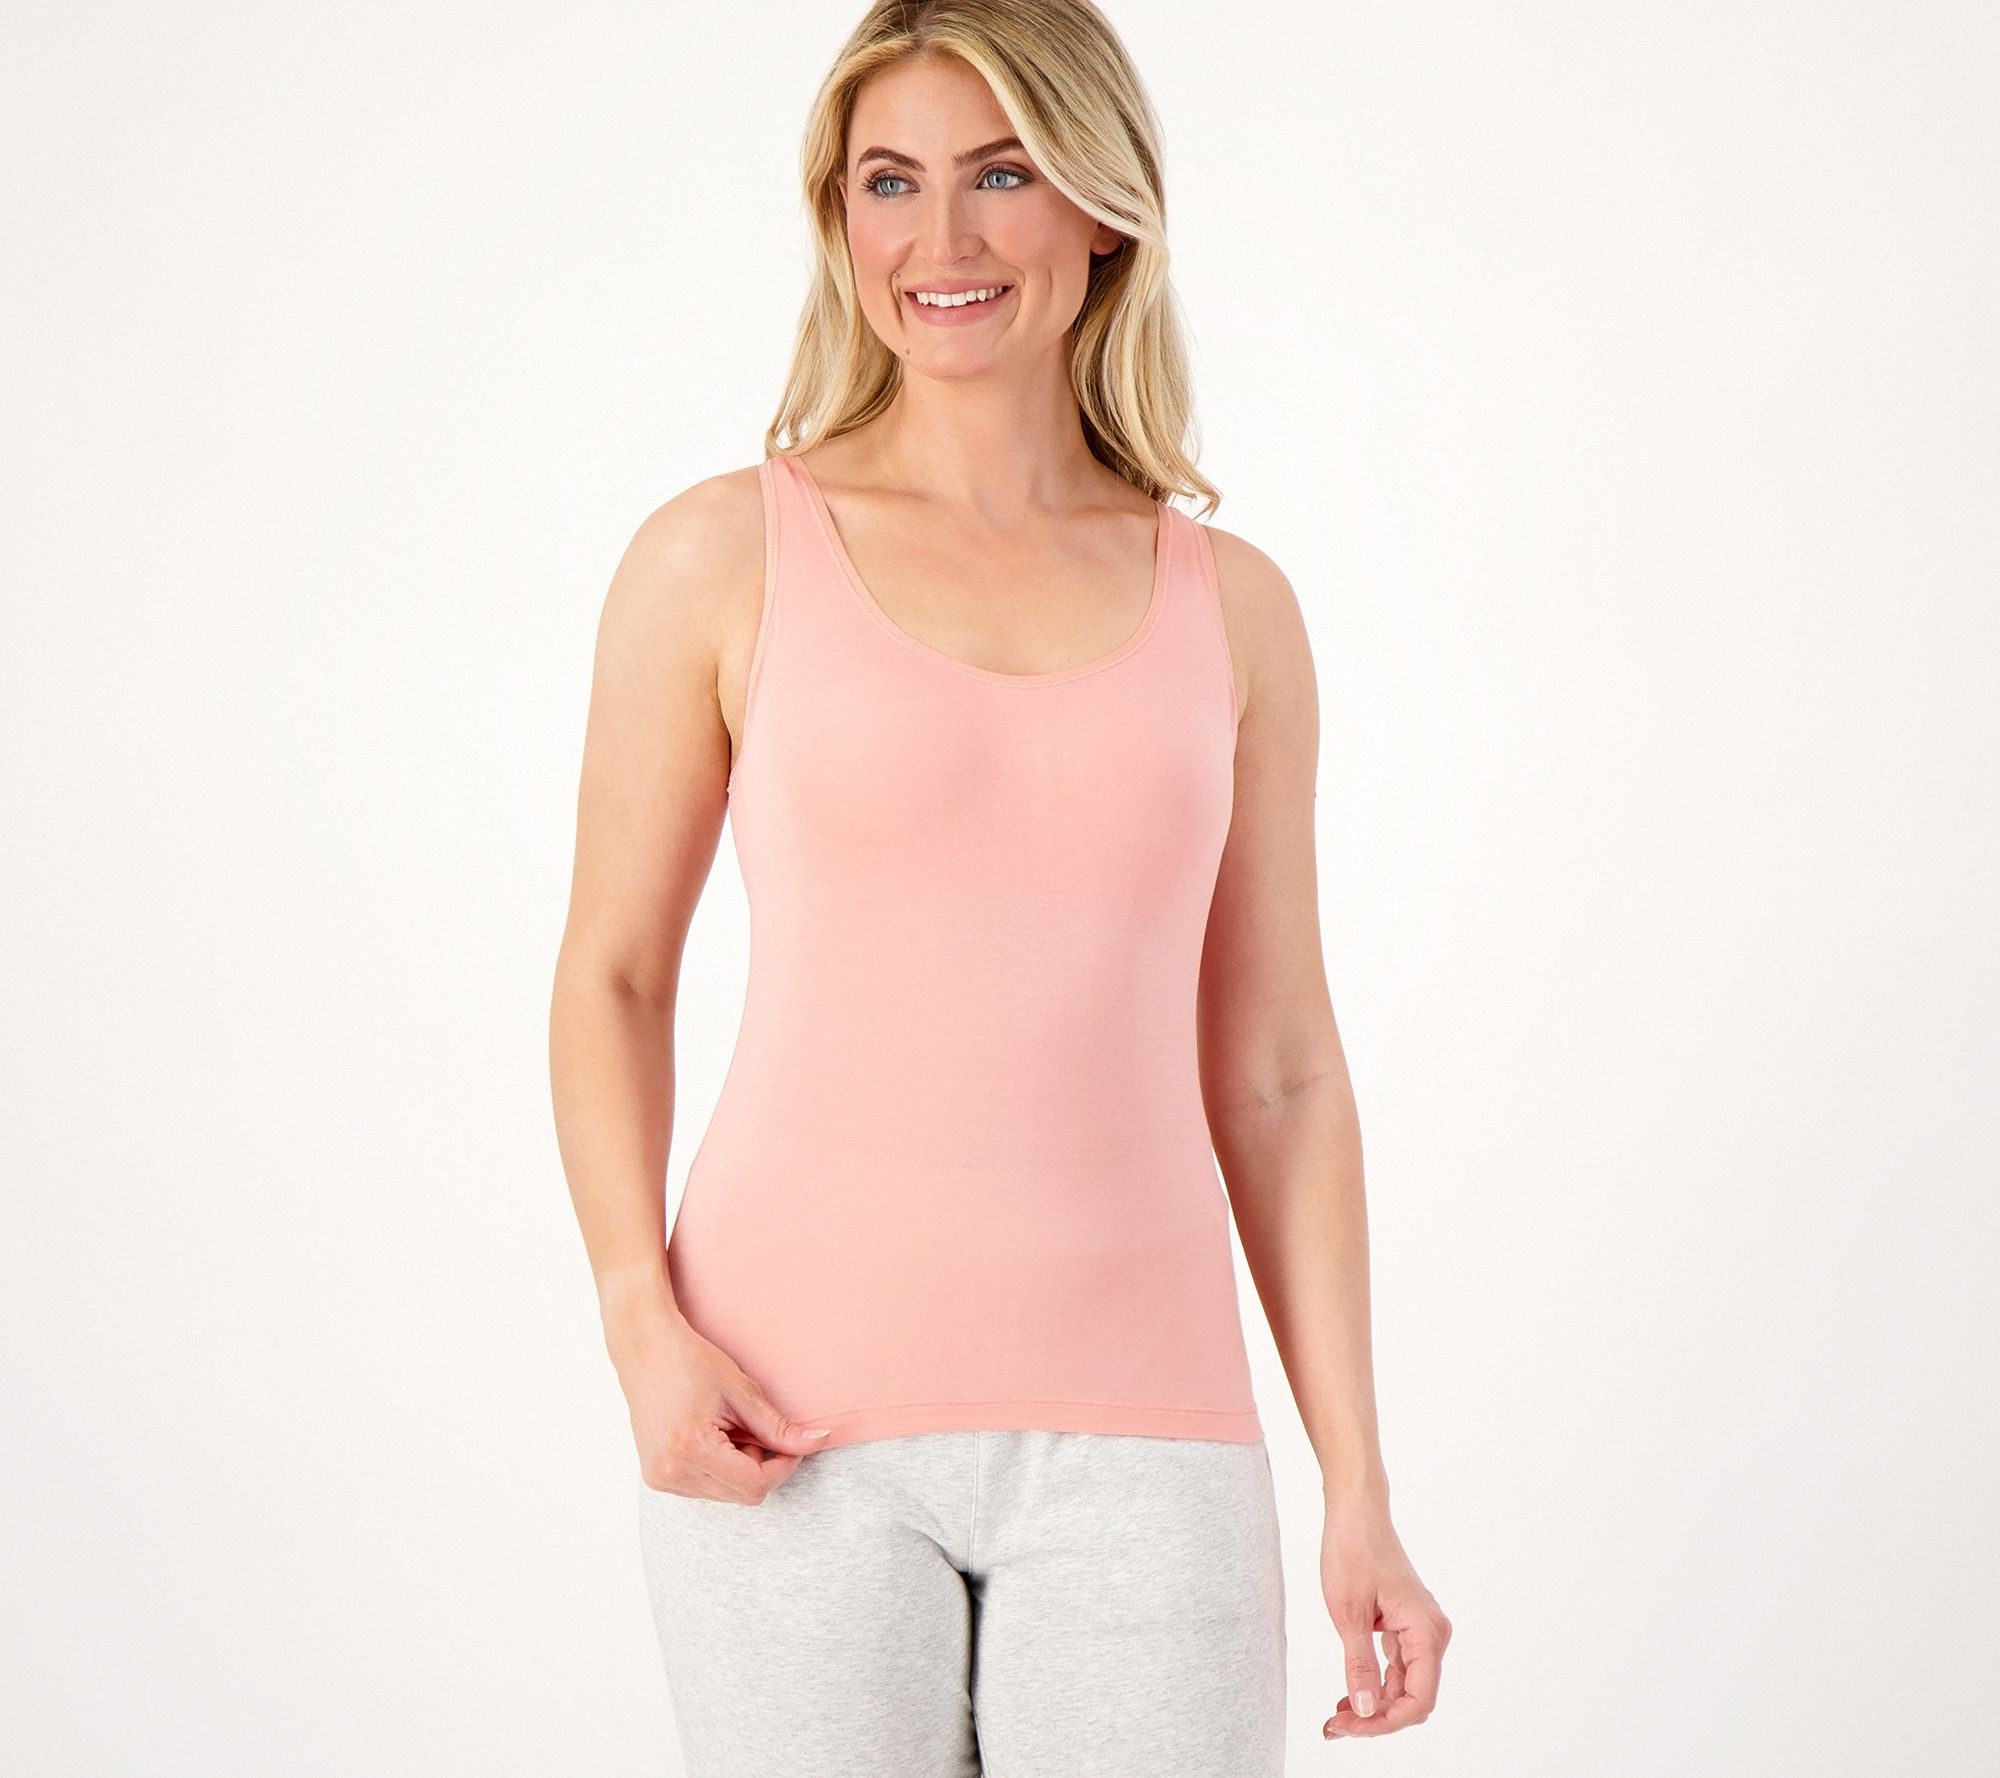 Shop Great Cuddl Duds Comfort Clothing For Mother's Day